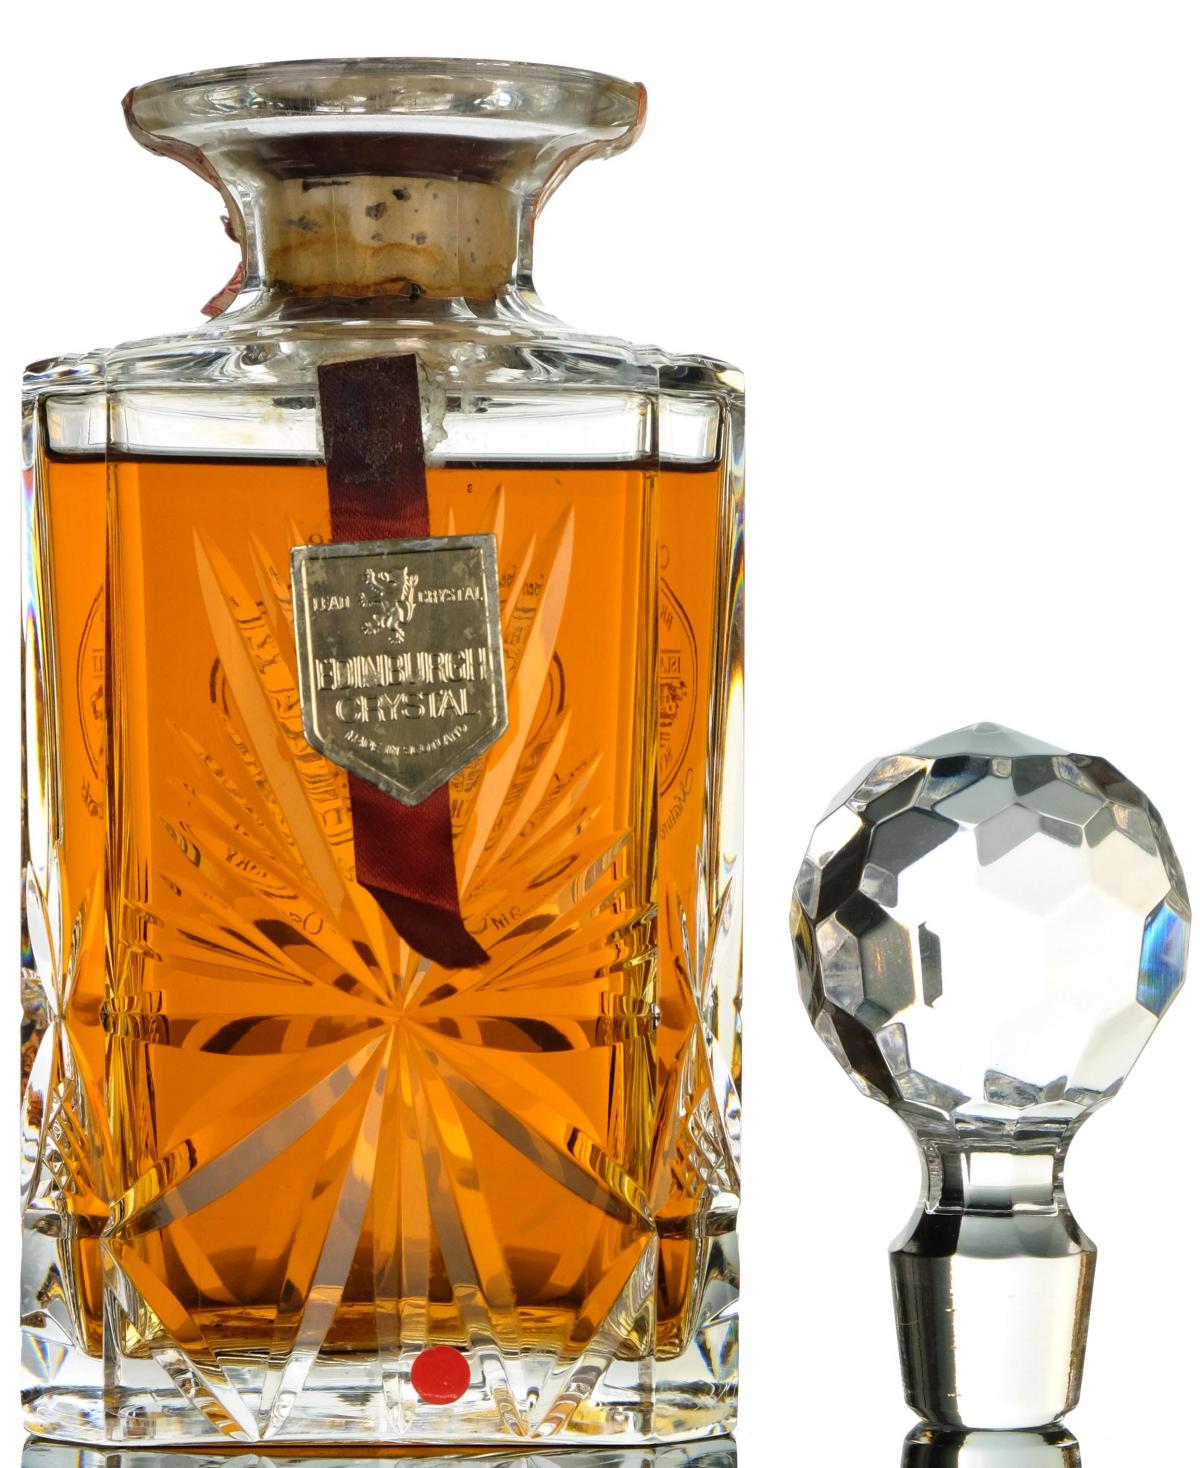 Bruichladdich Centenary Decanter 1881-1981 - One Of Only 12